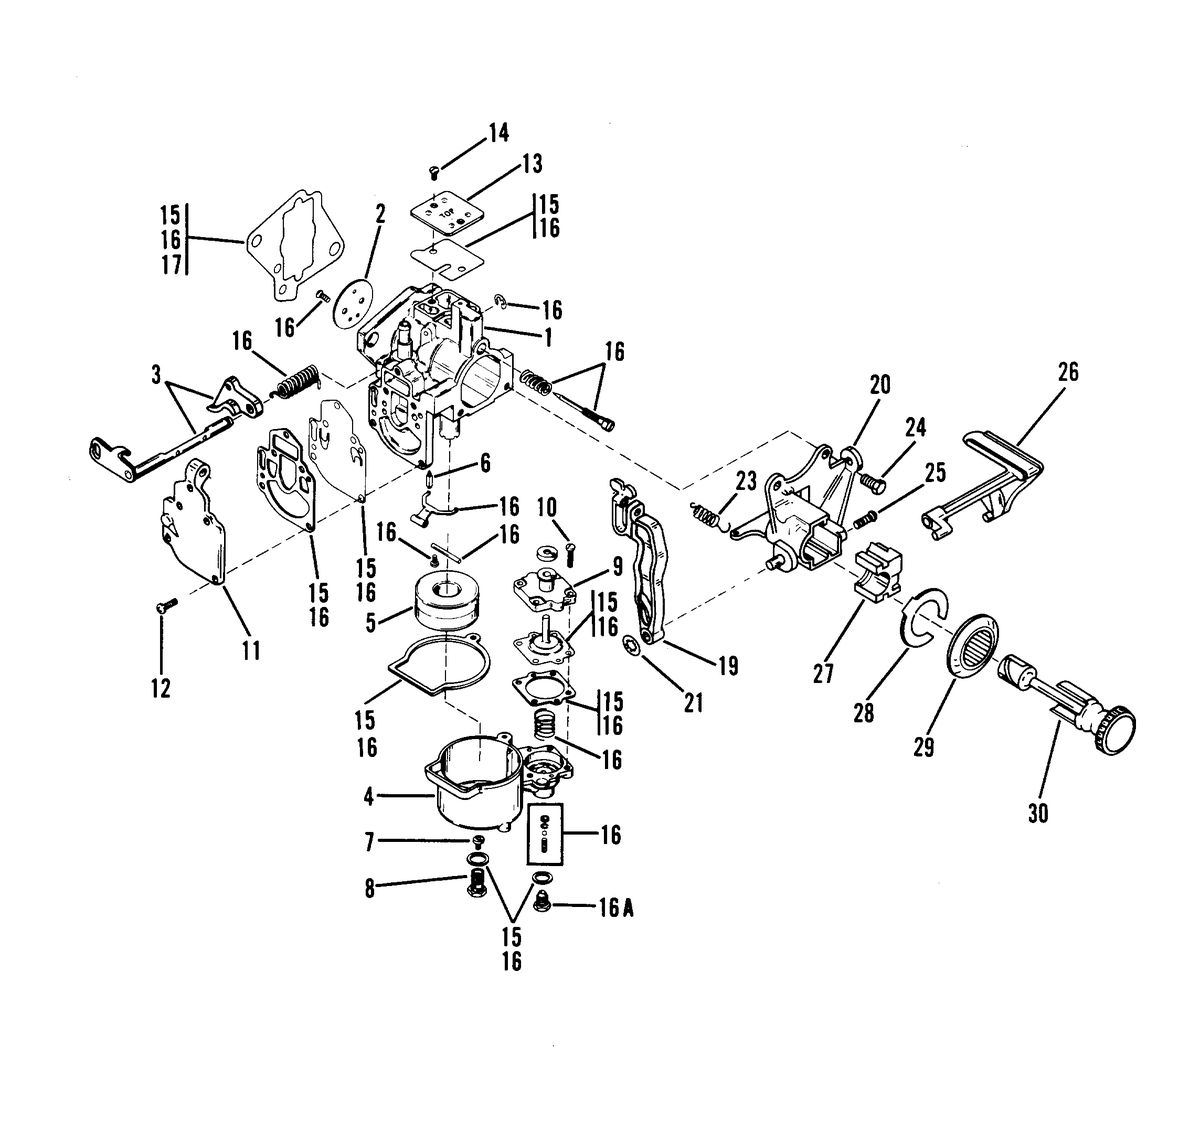 RACE OUTBOARD 10 XS CARBURETOR ASSEMBLY